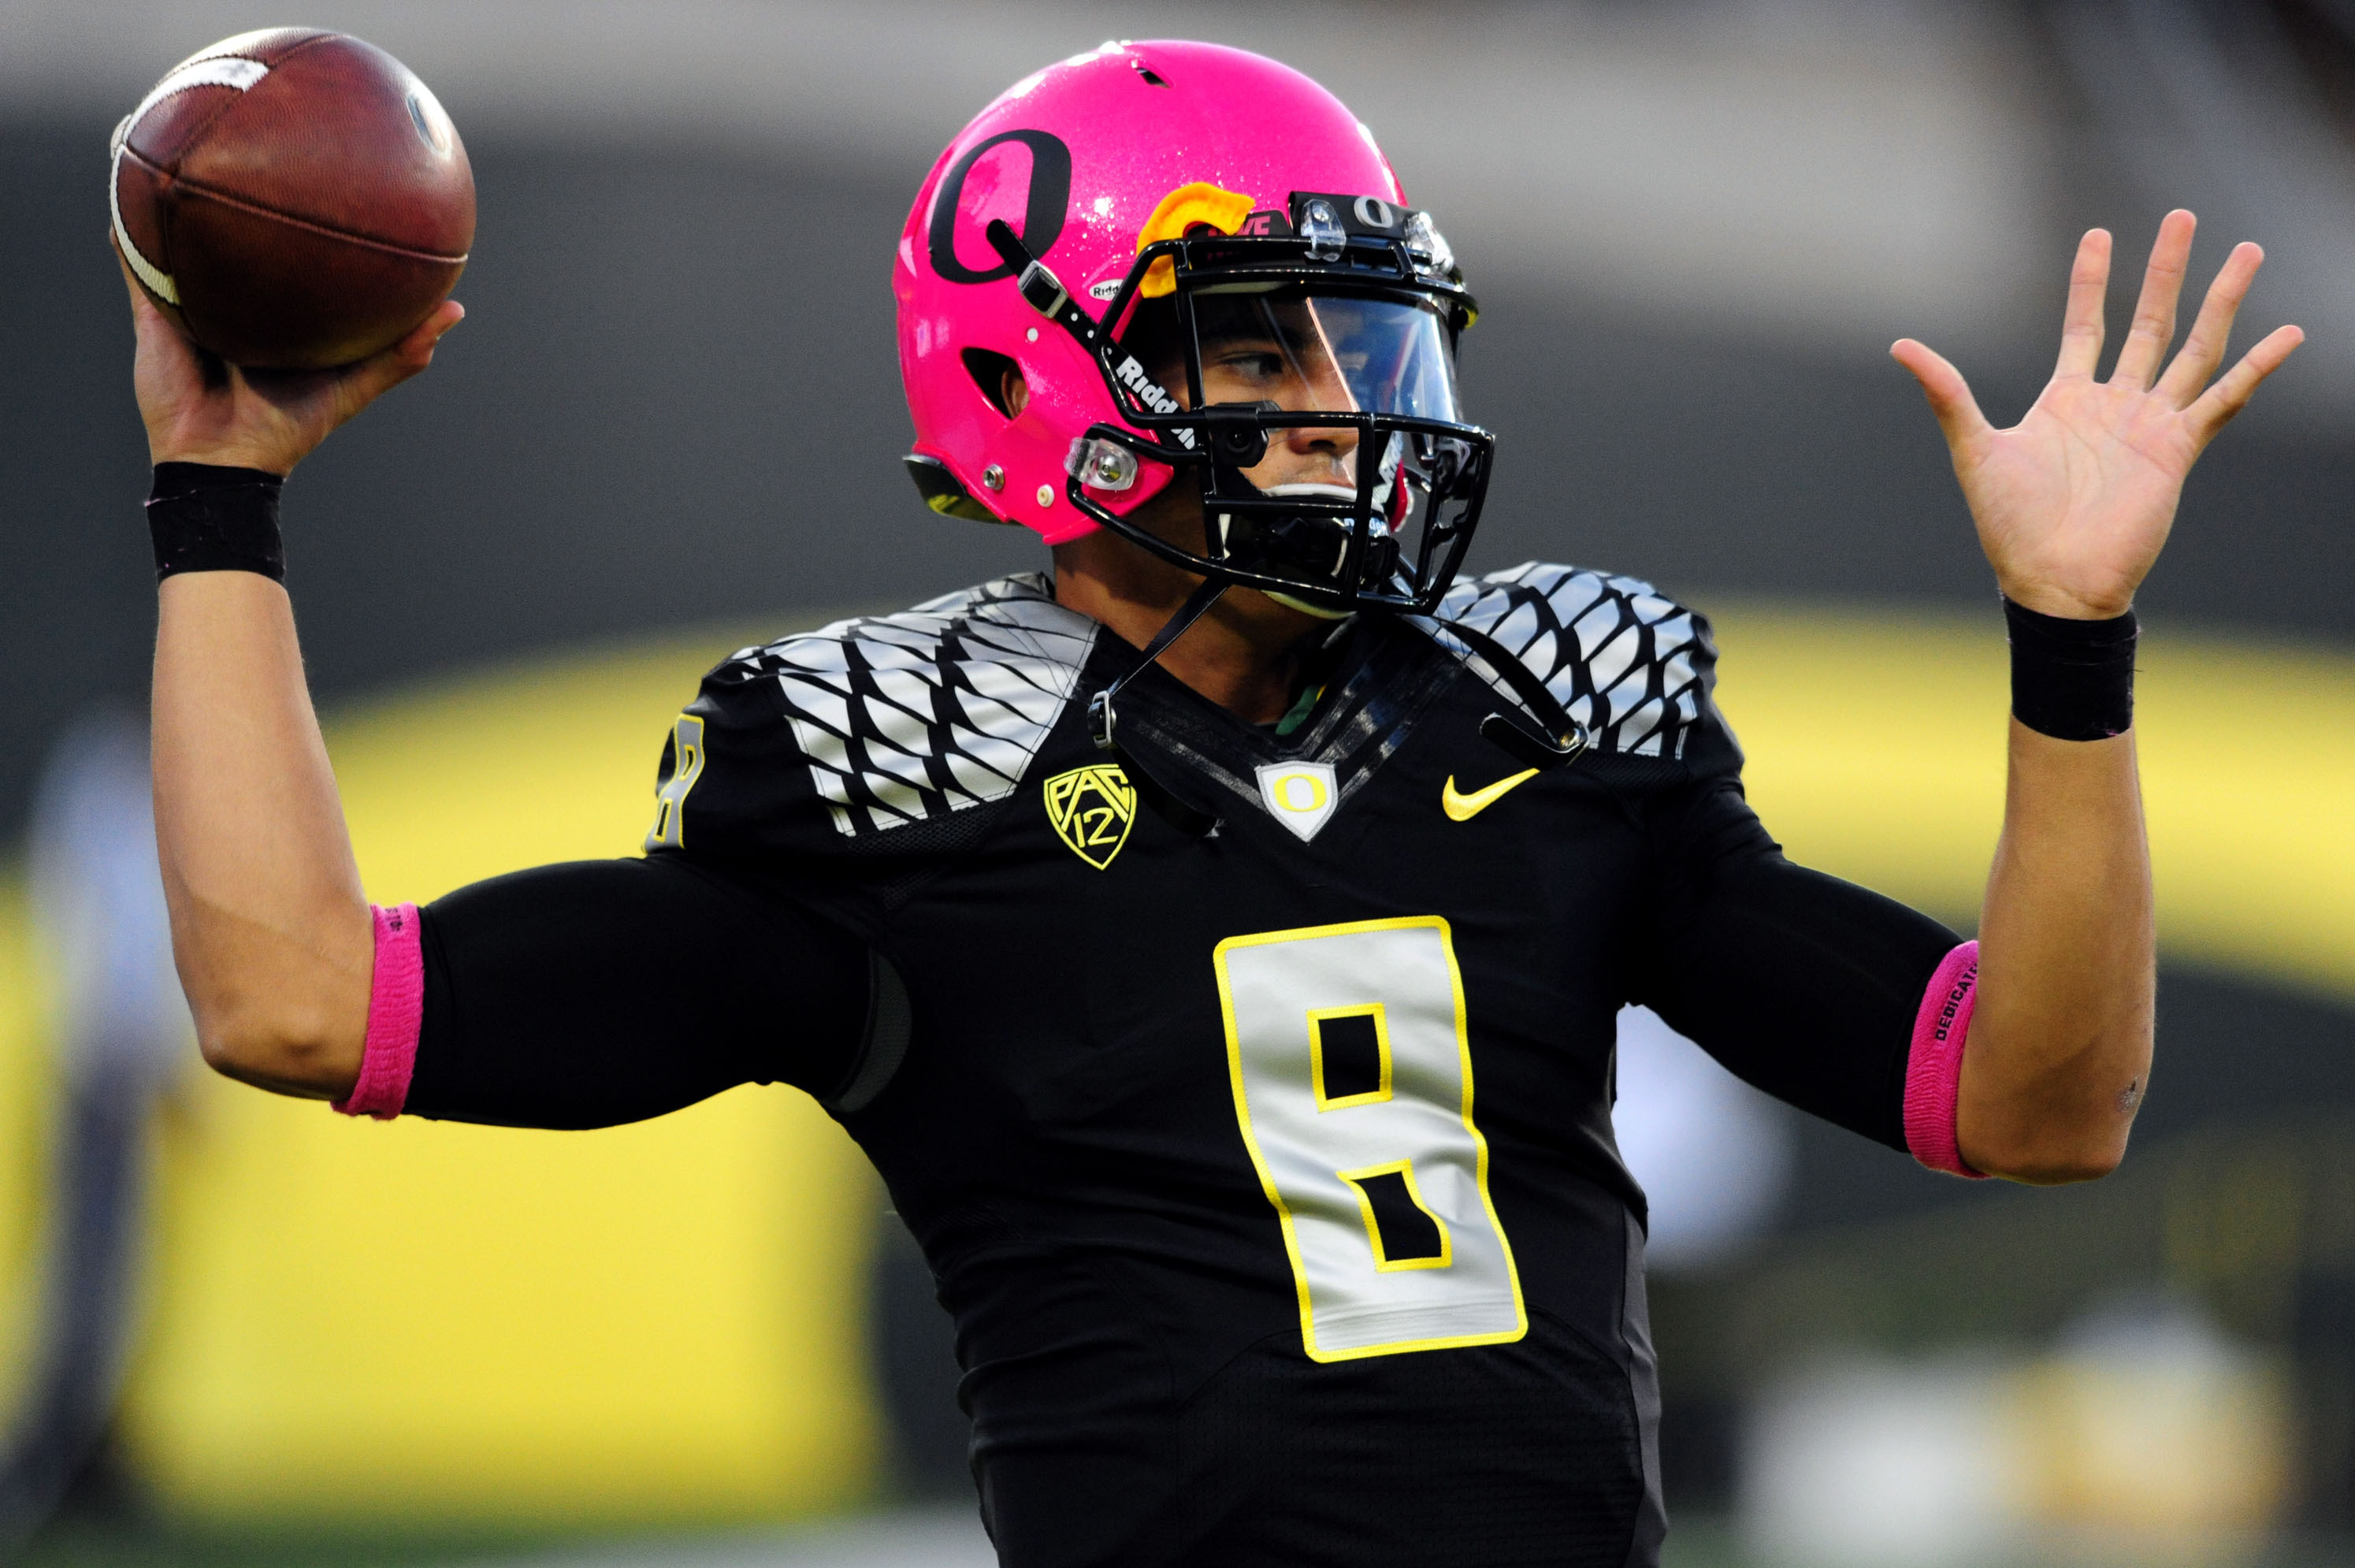 Marcus Mariota Can Extend Lead in Heisman Race with Statement Win